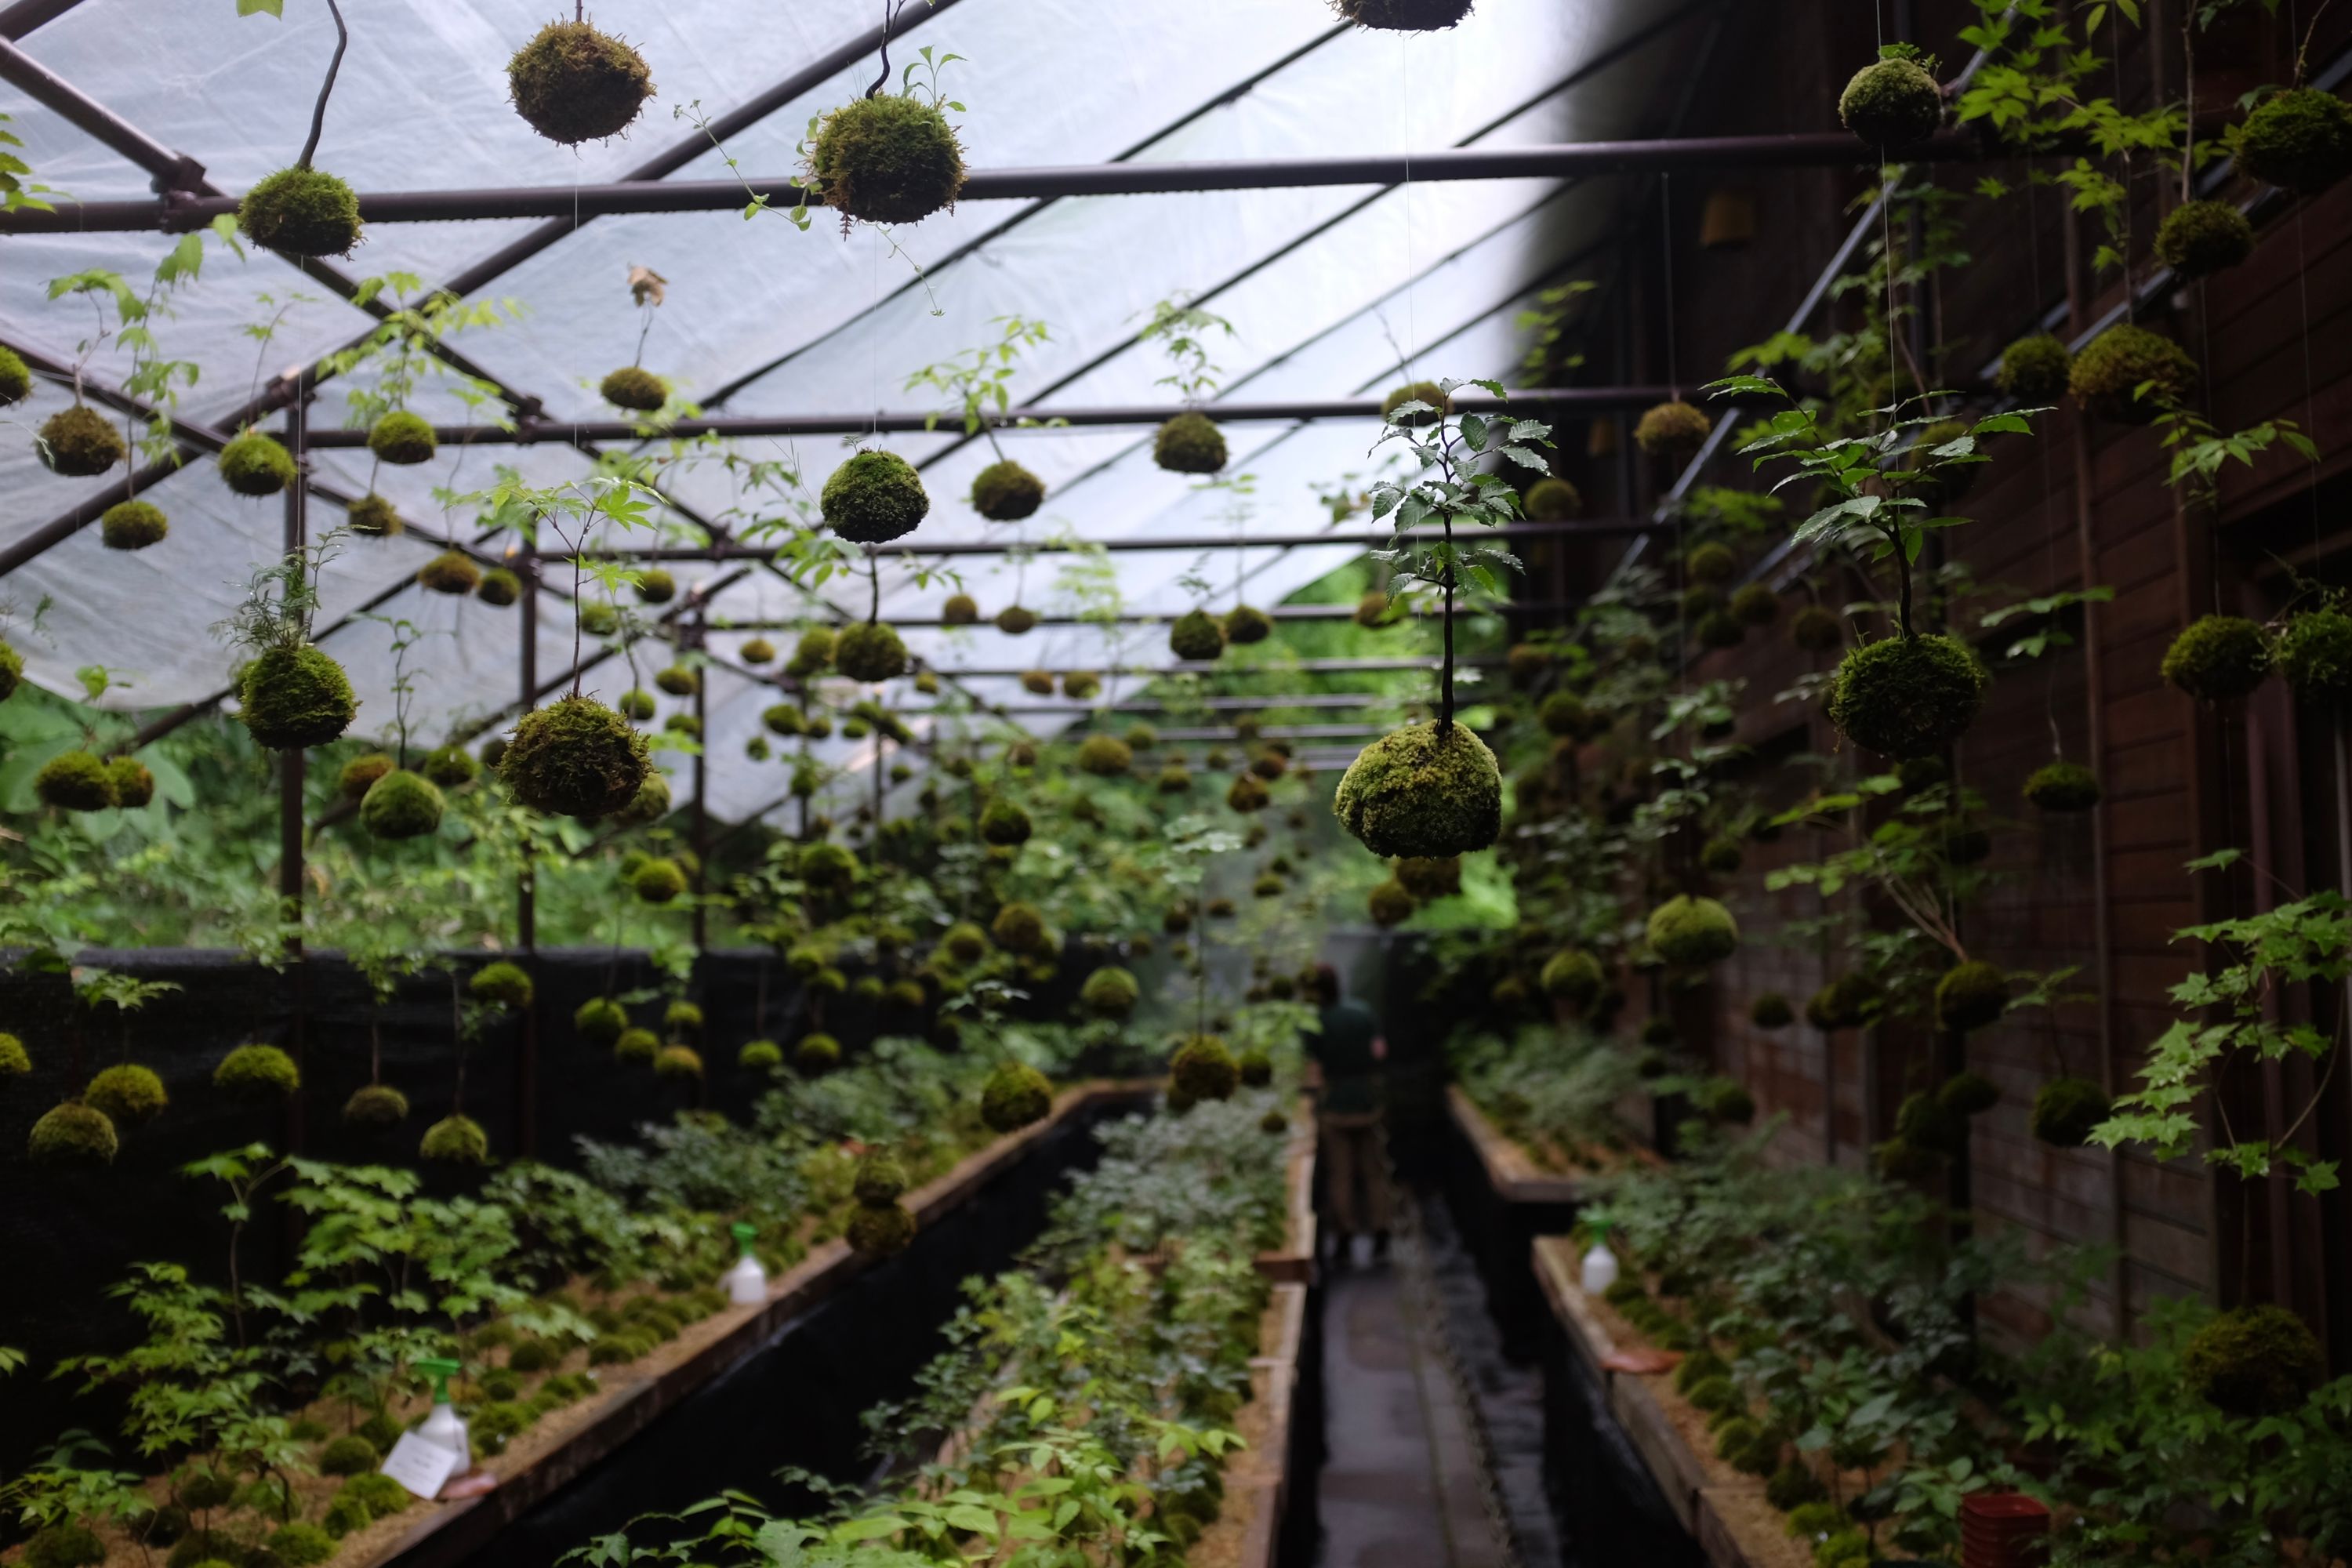 Kokedama, moss balls, hang from rails in a plant nursery.